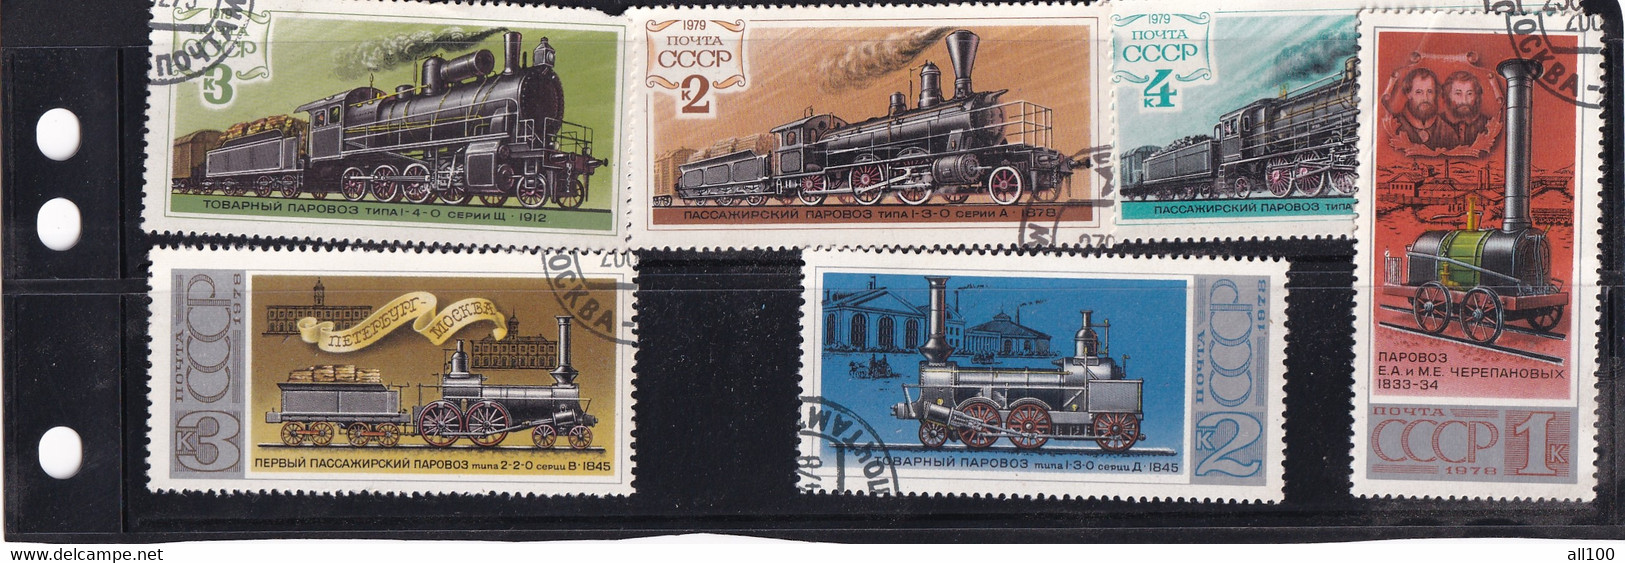 RUSSIAN LOCOMOTIVE STAMP COLLECTION TRAIN STAMP 1979 1978 1K 3K 2K 4K PERFORATED STAMP DANTELE - Used Stamps